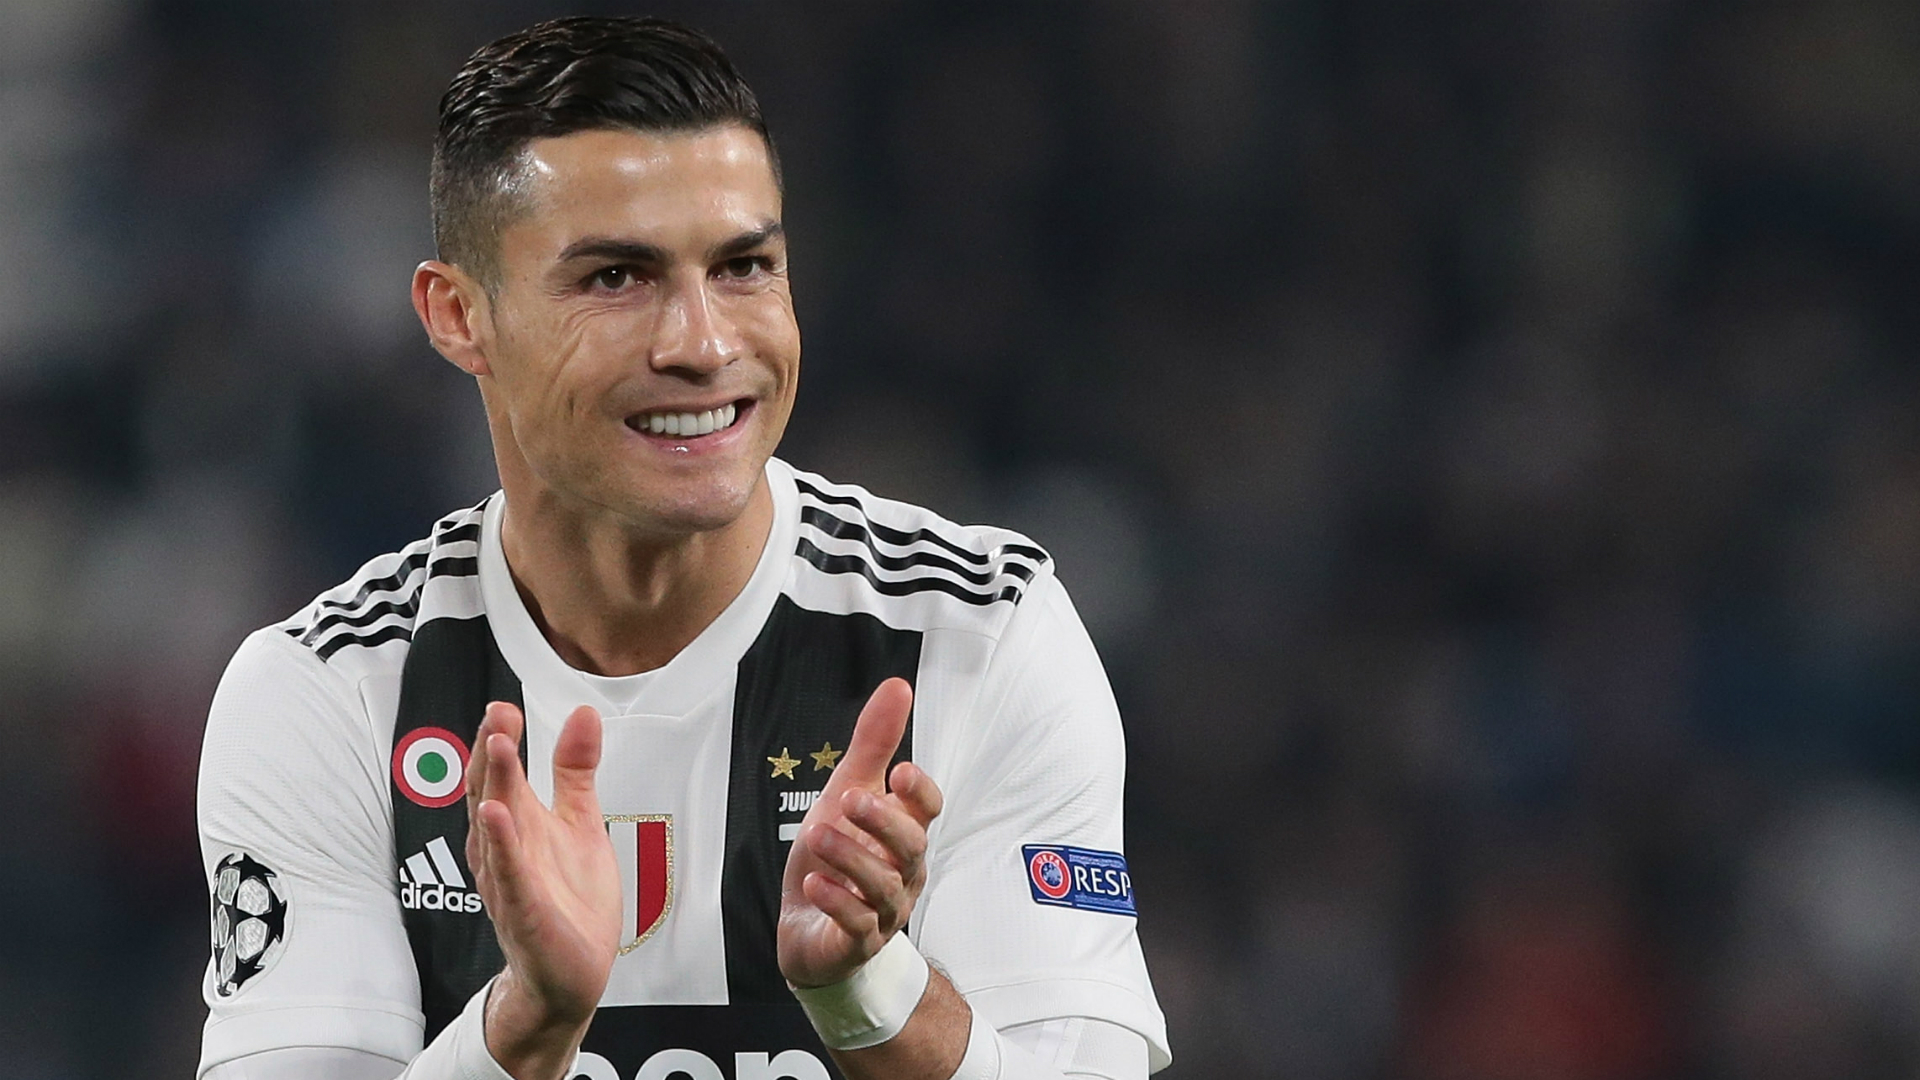 Juventus superstar Cristiano Ronaldo is excited by his team's potential heading into the knockout phase after Wednesday's loss.